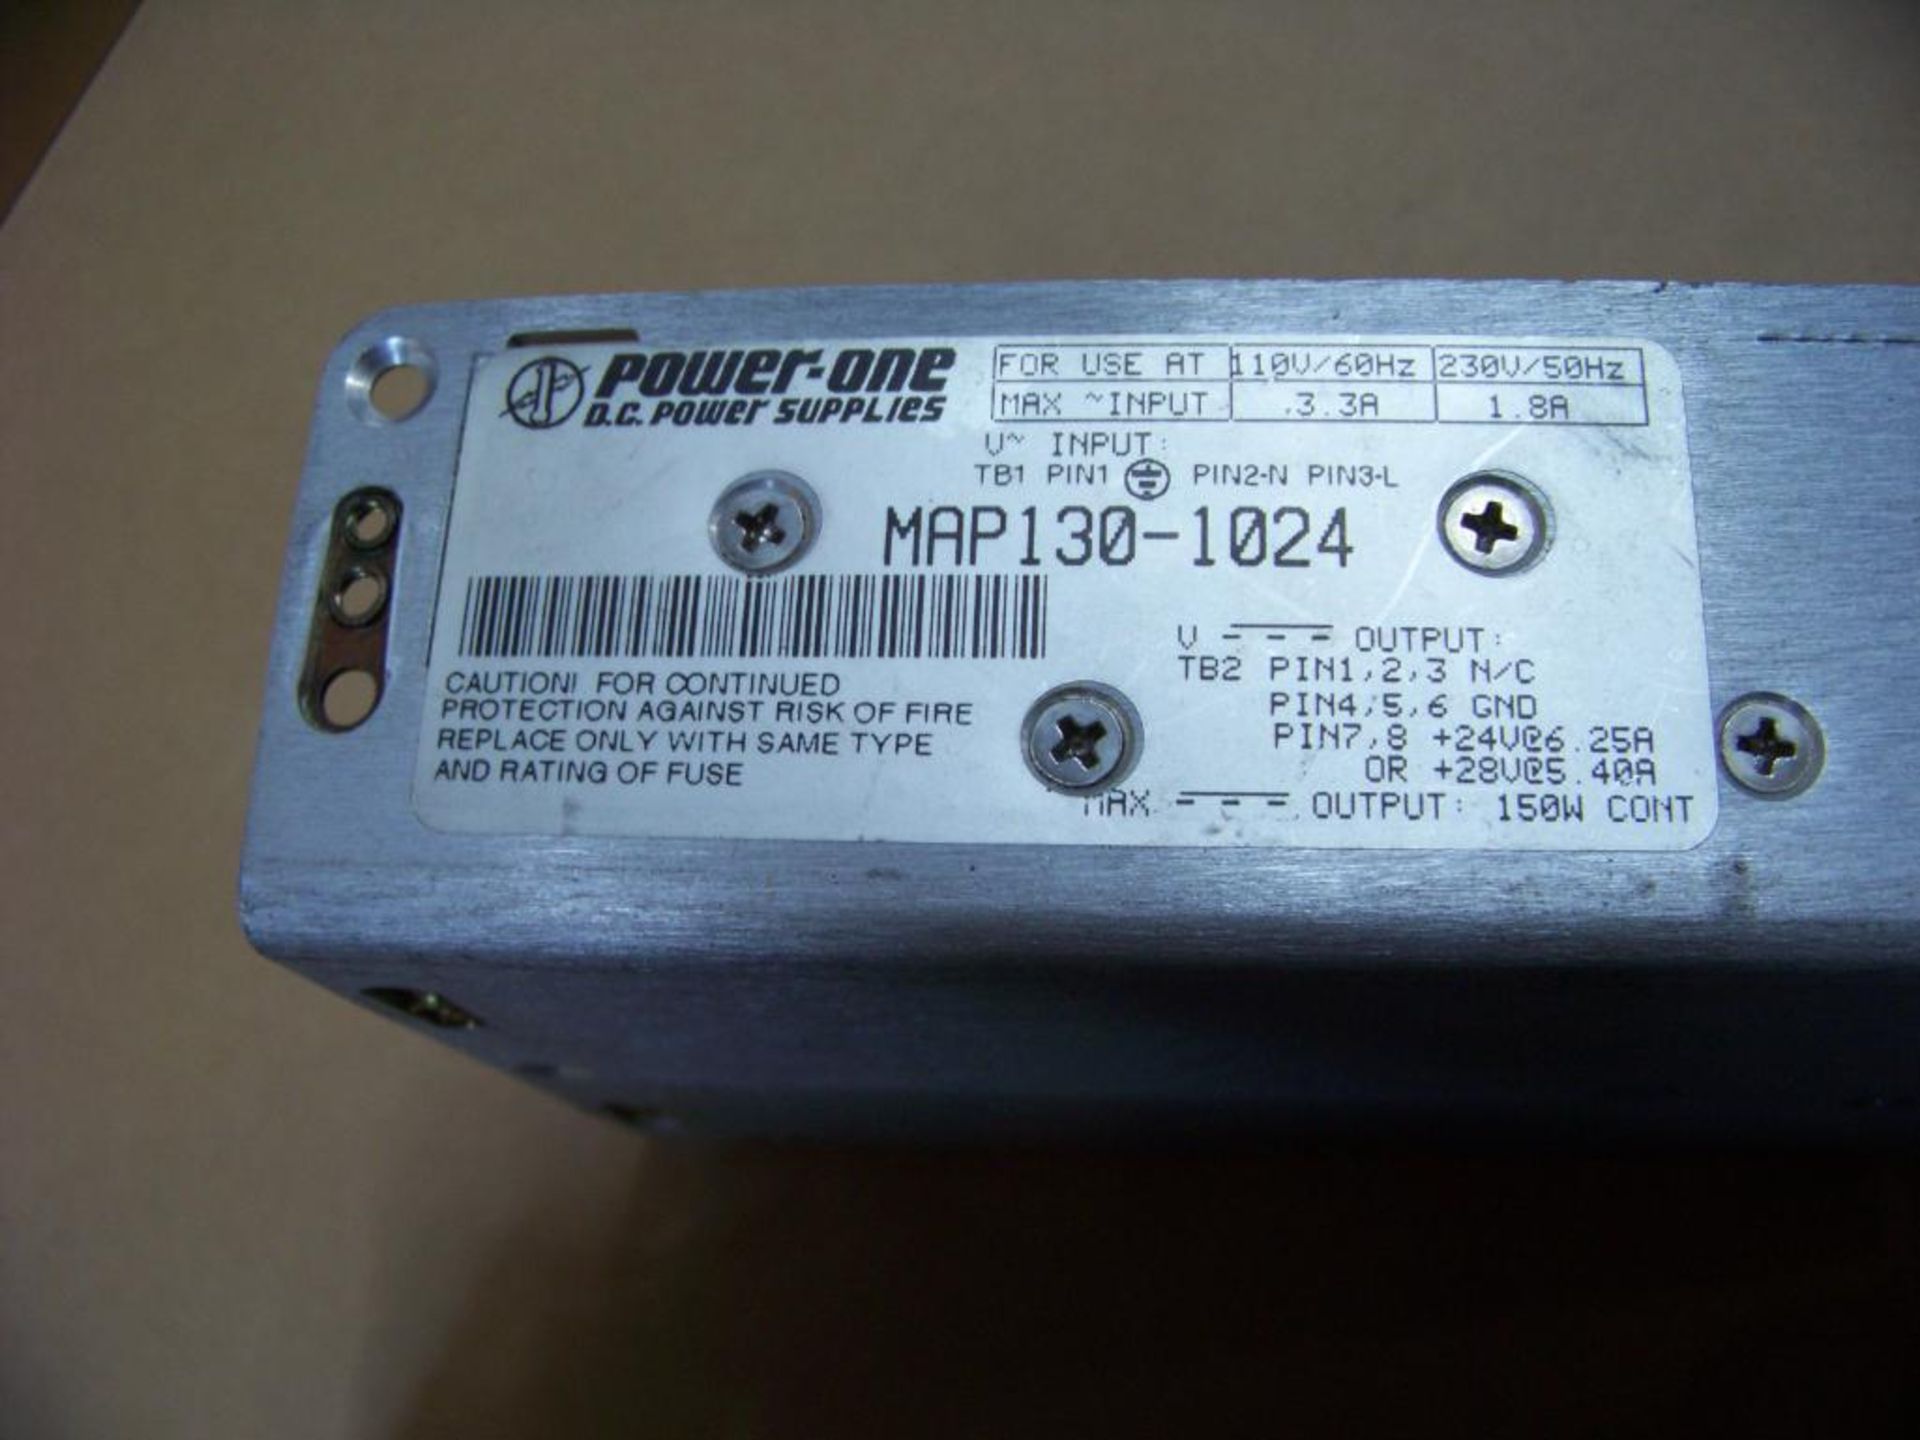 4 - POWER ONE 24V POWER SUPPLIES, # MAP130-1024 - Image 4 of 4